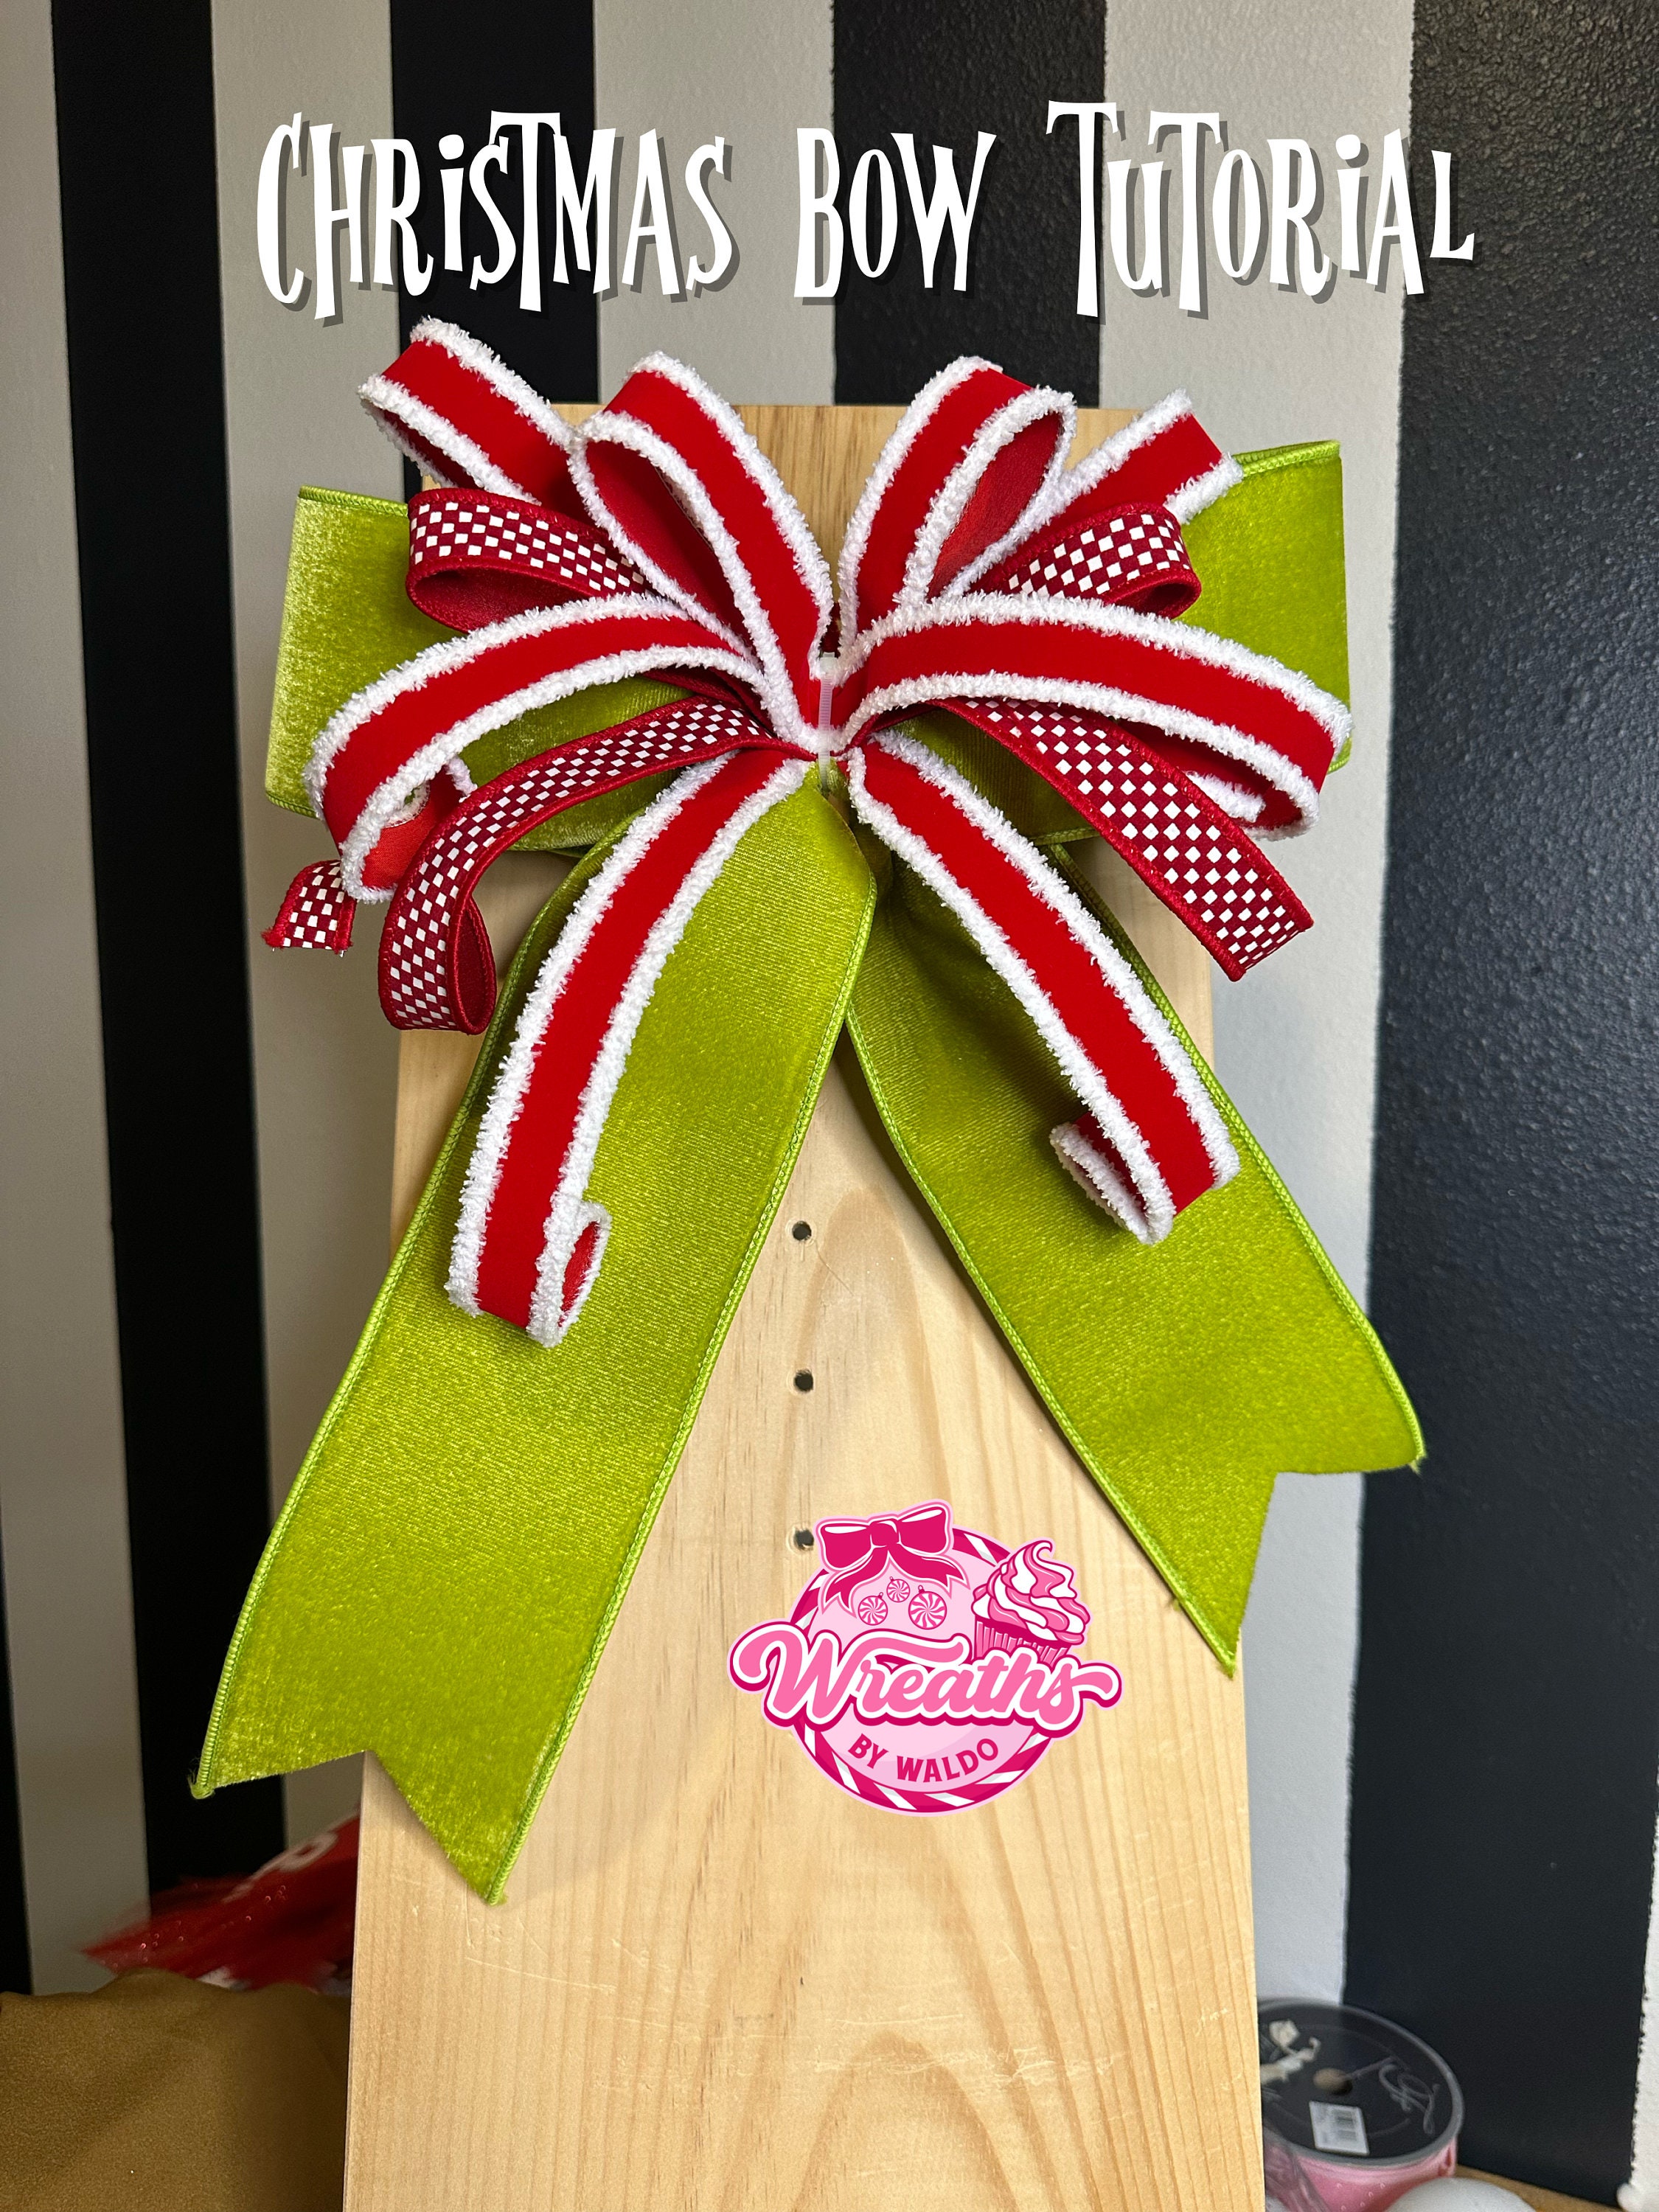 Learn How to Make a Ribbon Storage Tree Stand Shelf Tutorial, Ribbon Storage  DIY, Ribbon Storage Tutorial, Ribbon Craft Storage Ideas DIY 